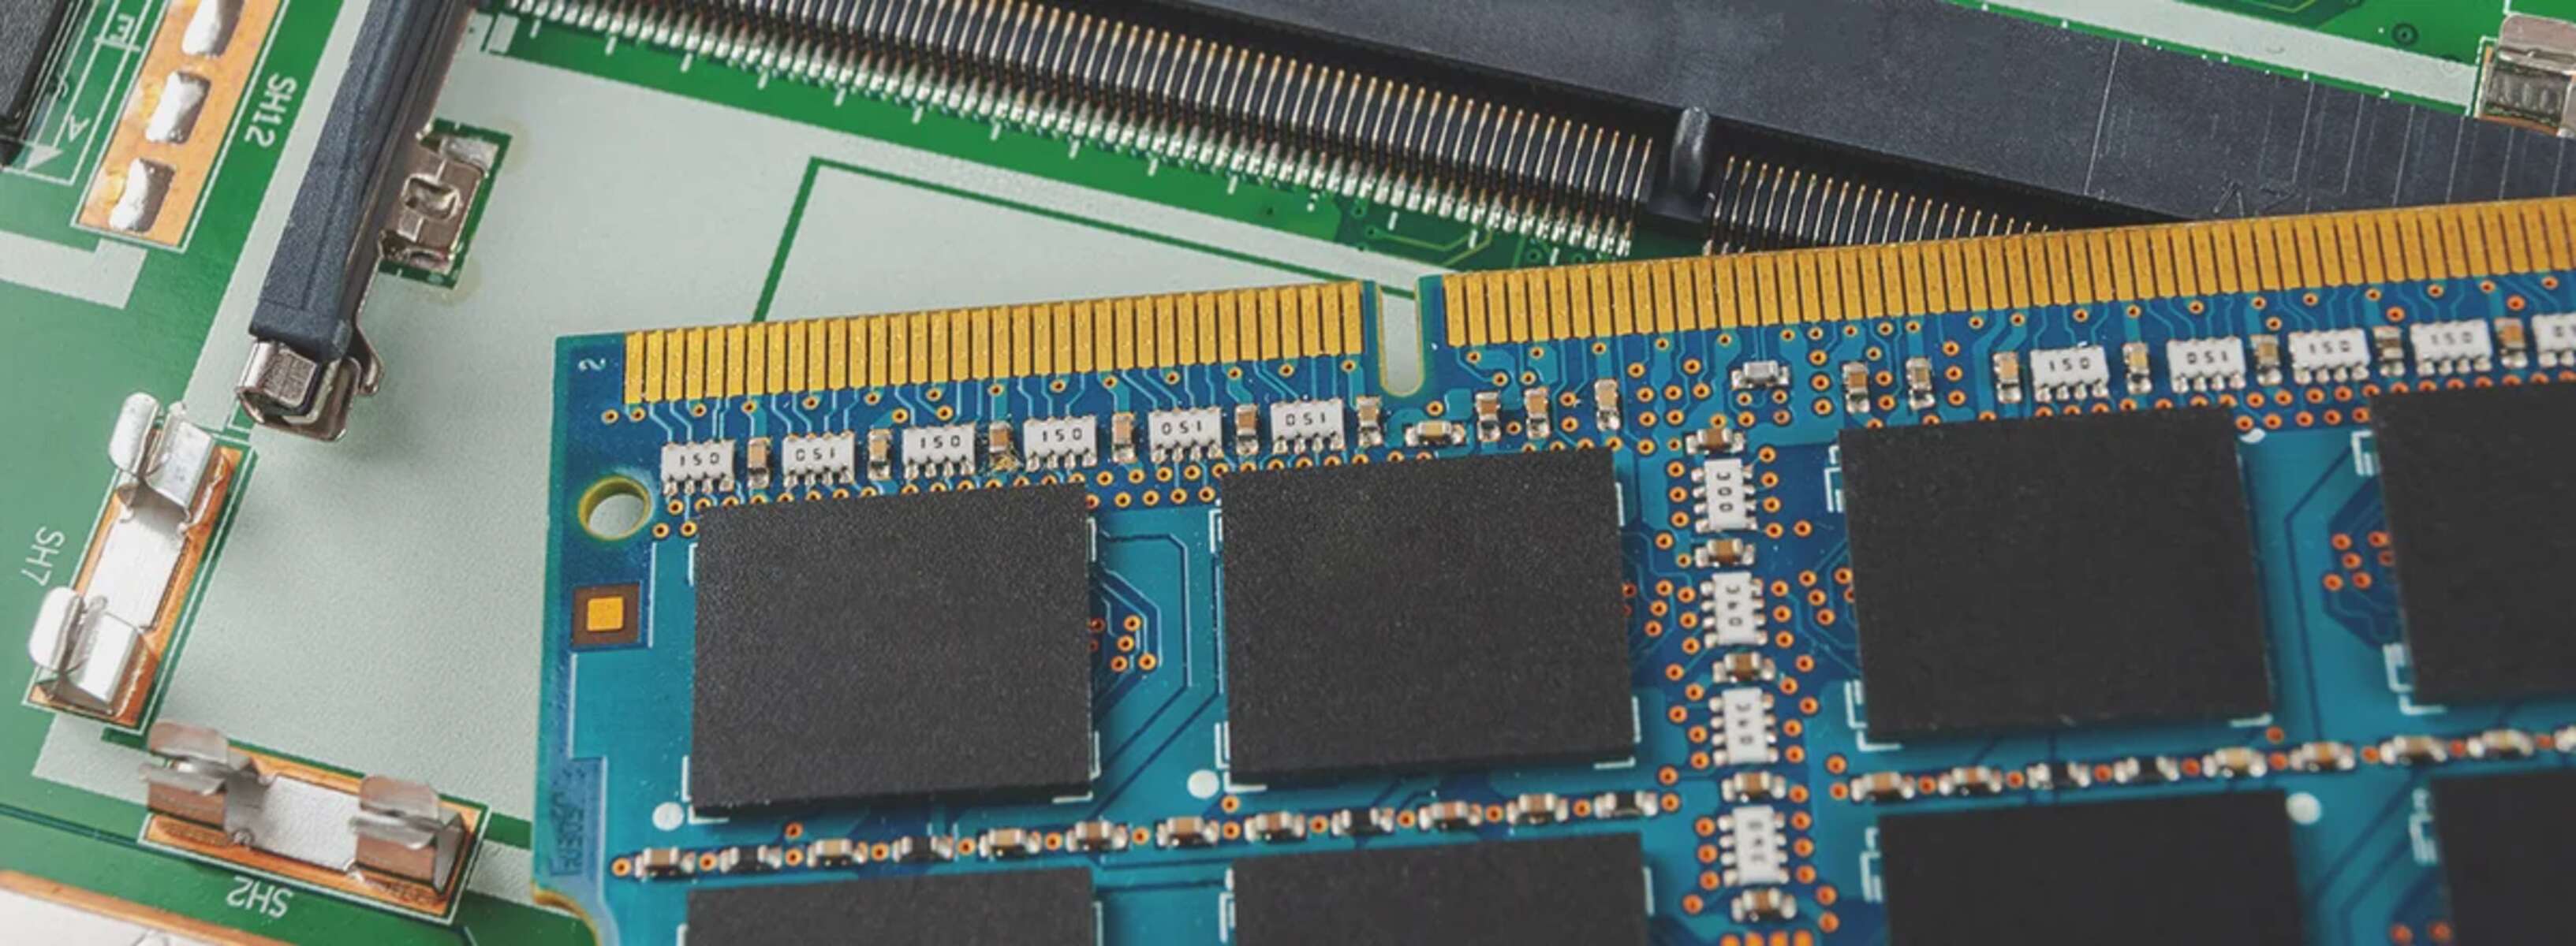 How Much RAM Does The Most Powerful Computer Have